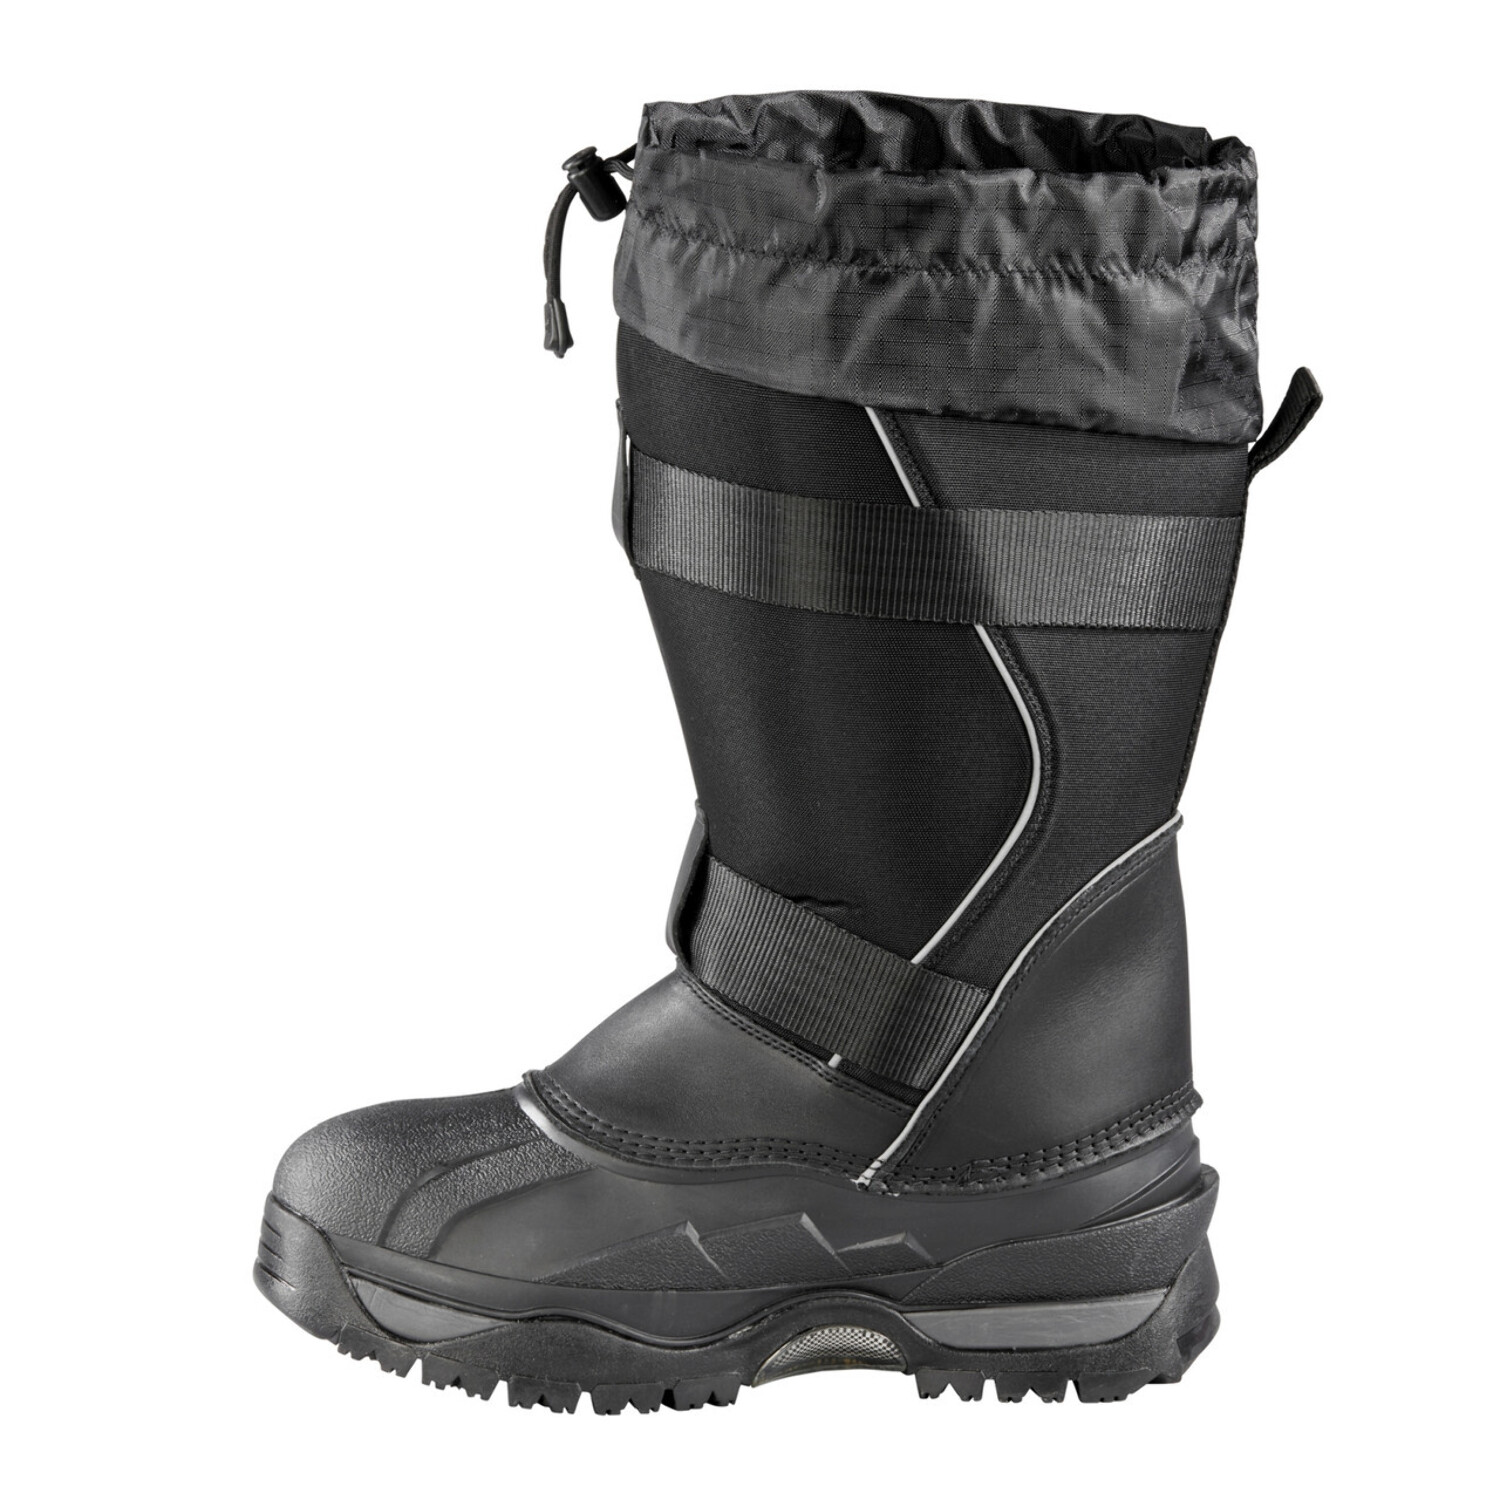 Baffin Impact Insulated Snow Boot - Men's - image 3 of 5